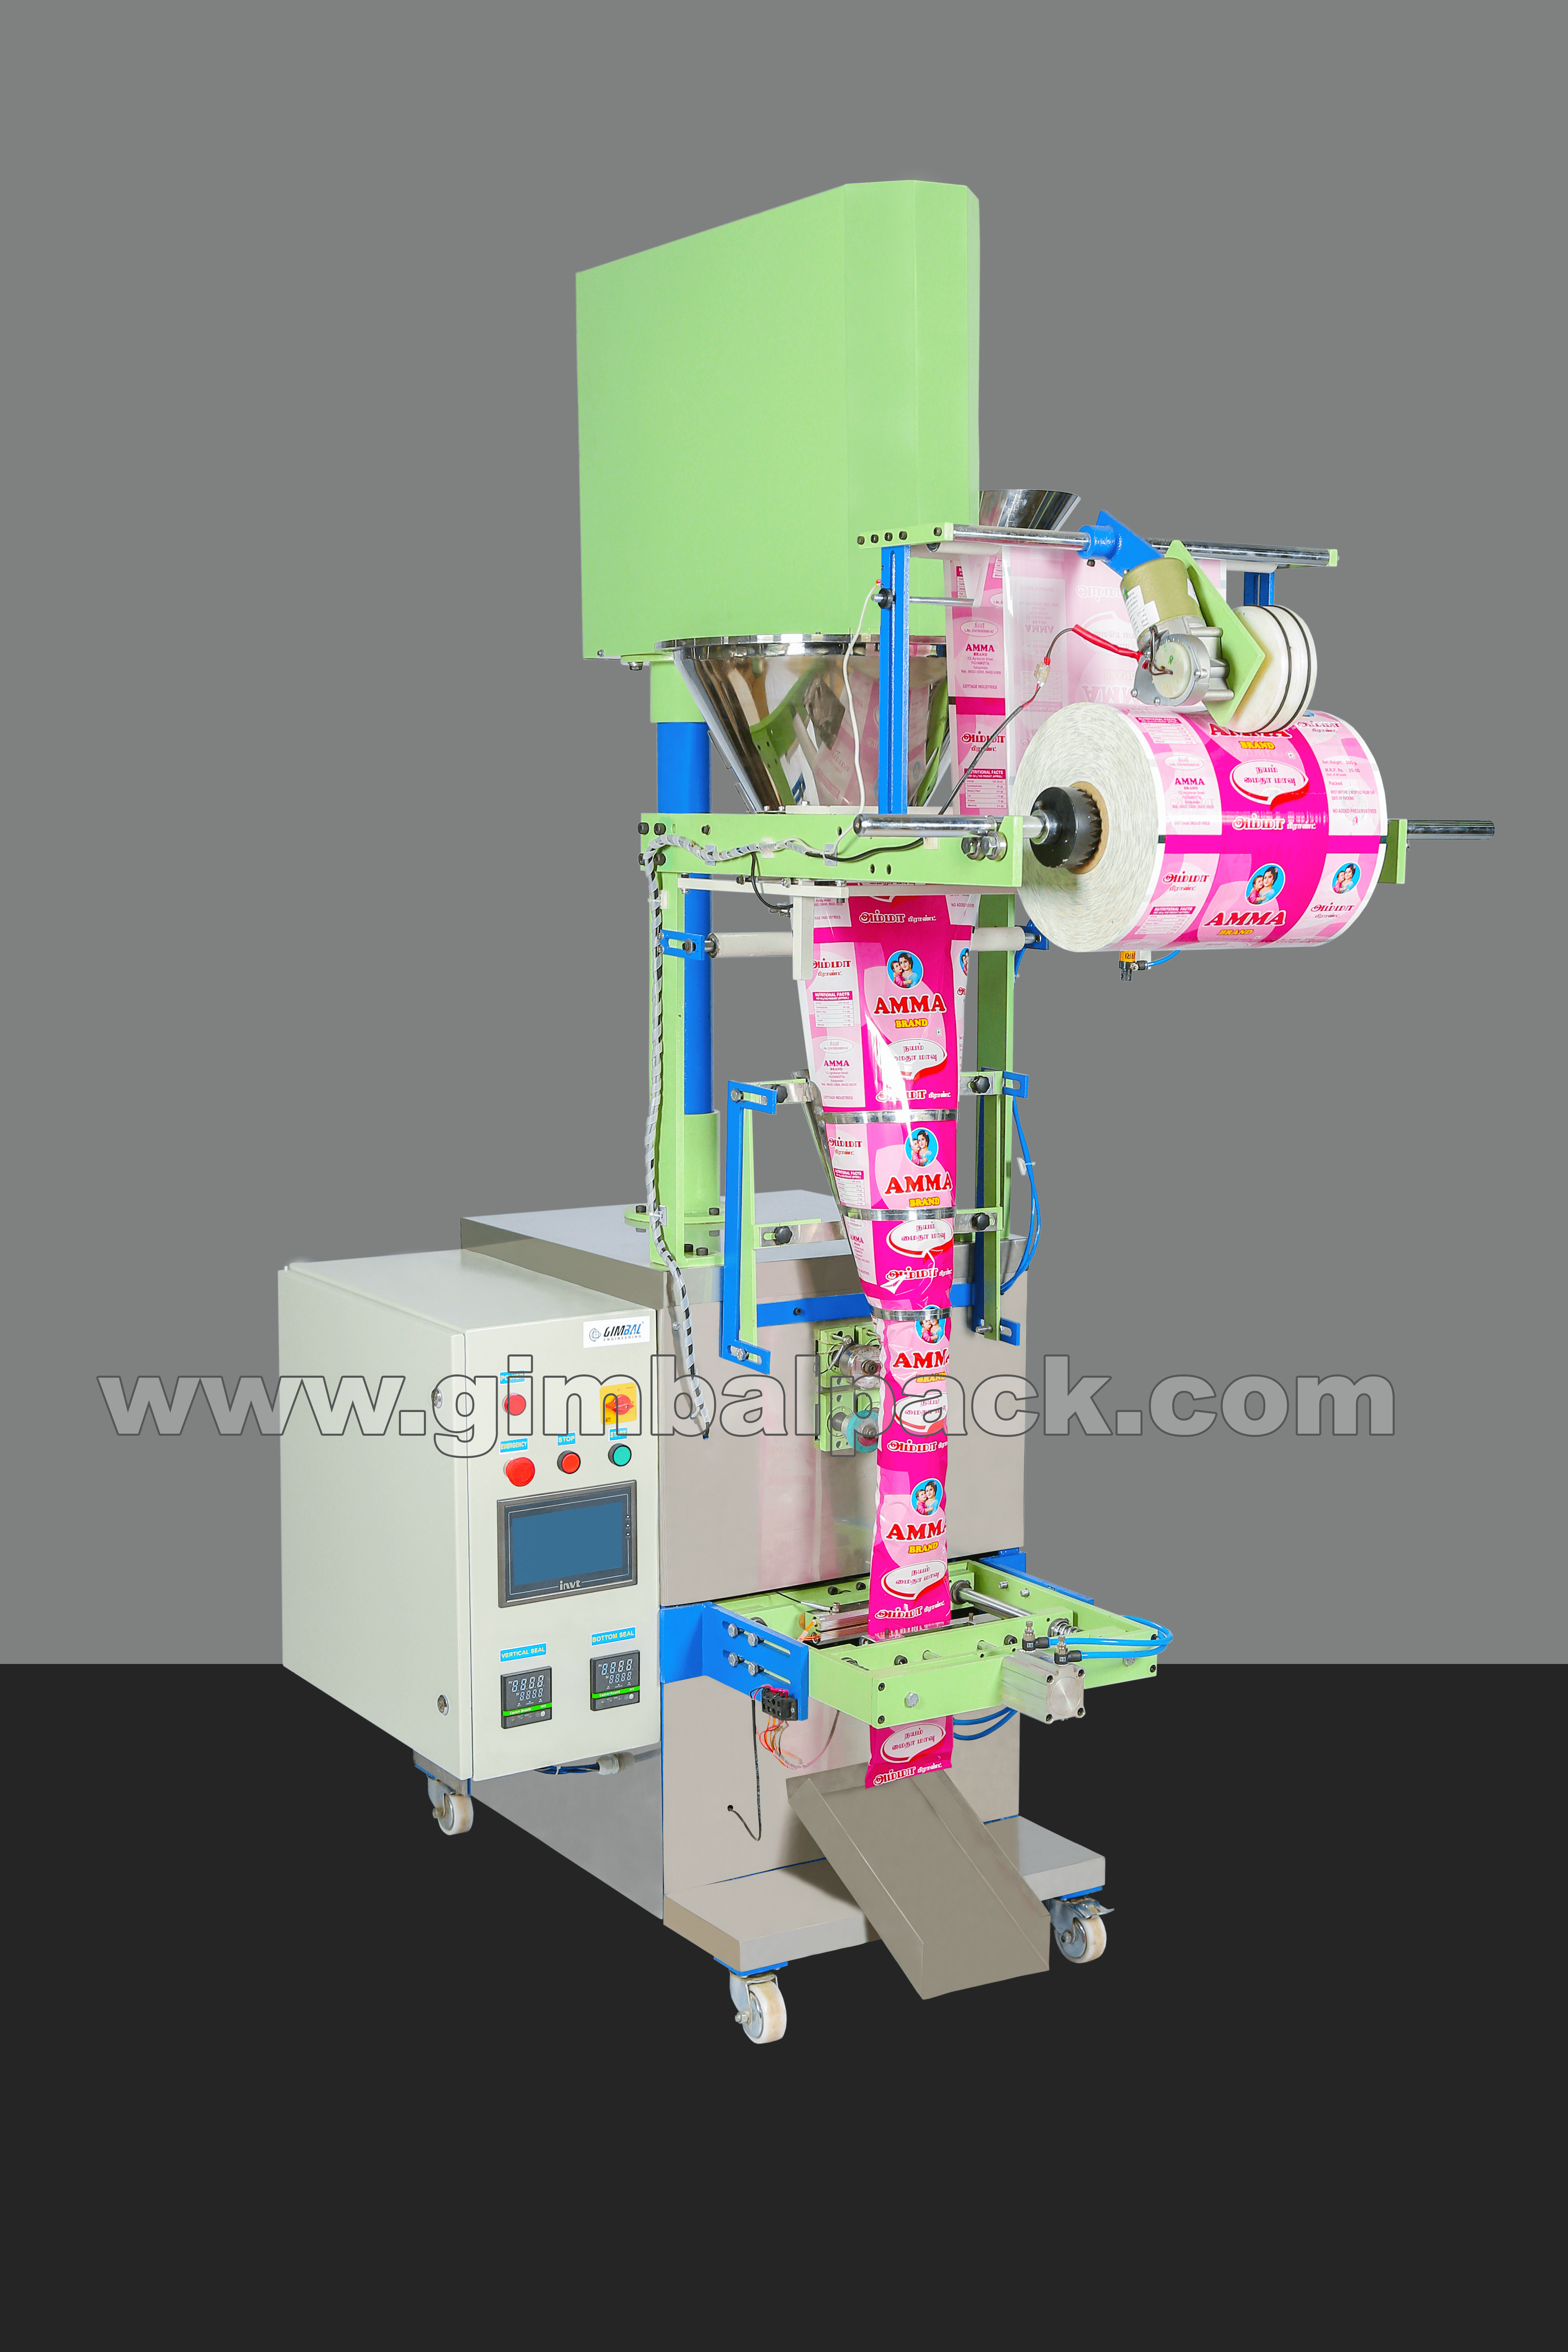 Automatic Coffee Powder Pouch Packaging in Coimbatore